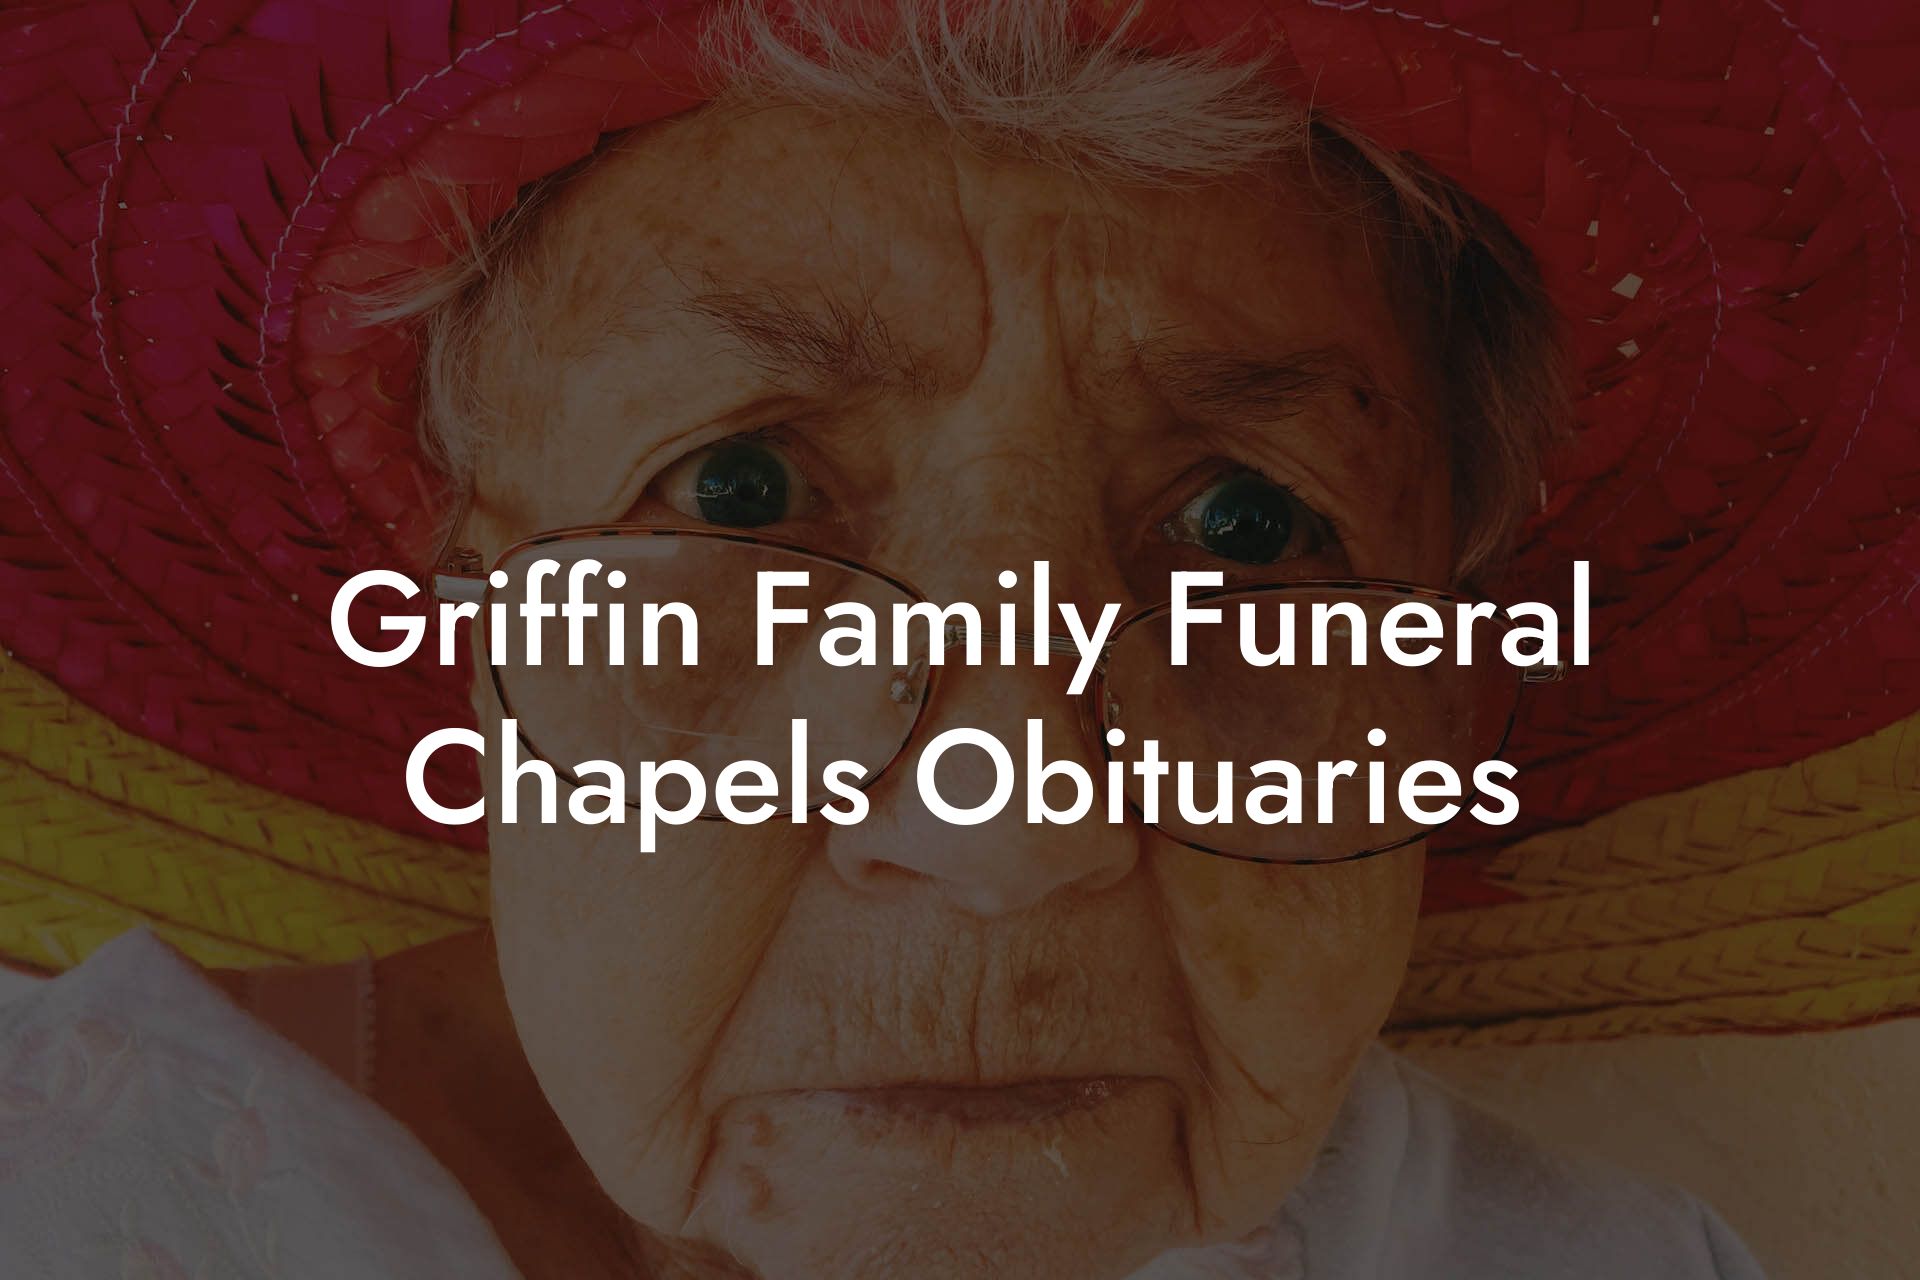 Griffin Family Funeral Chapels Obituaries